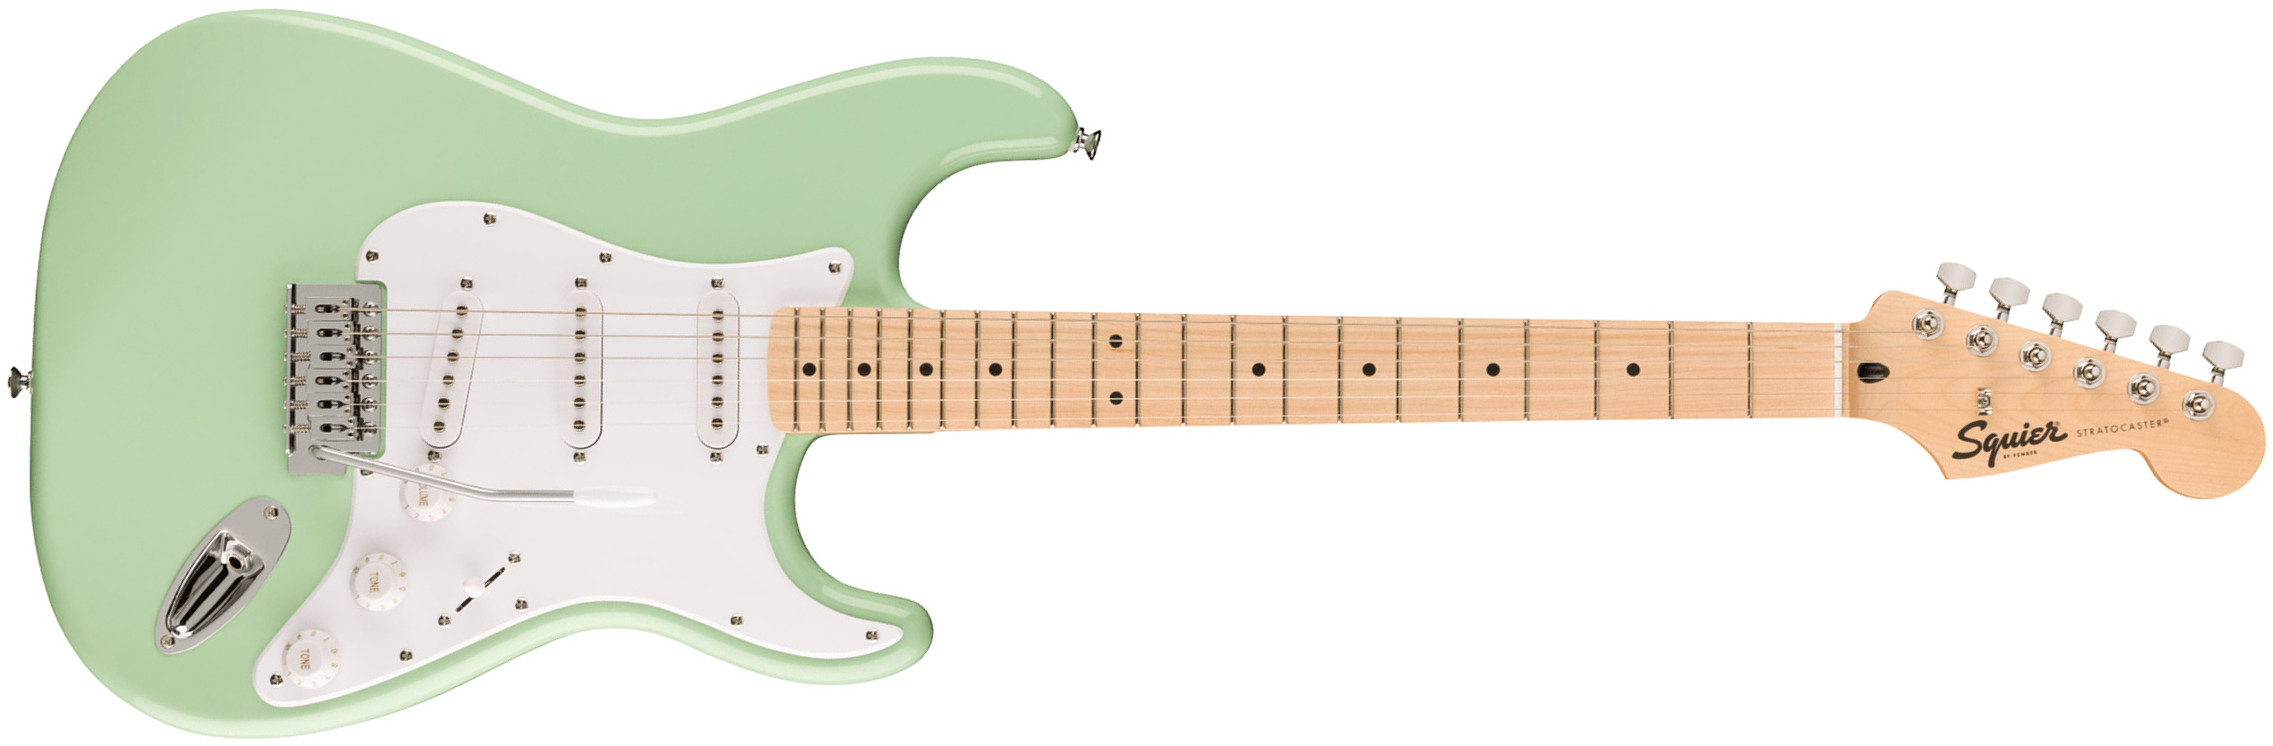 Squier Strat Sonic 3s Trem Mn - Surf Green - Str shape electric guitar - Main picture